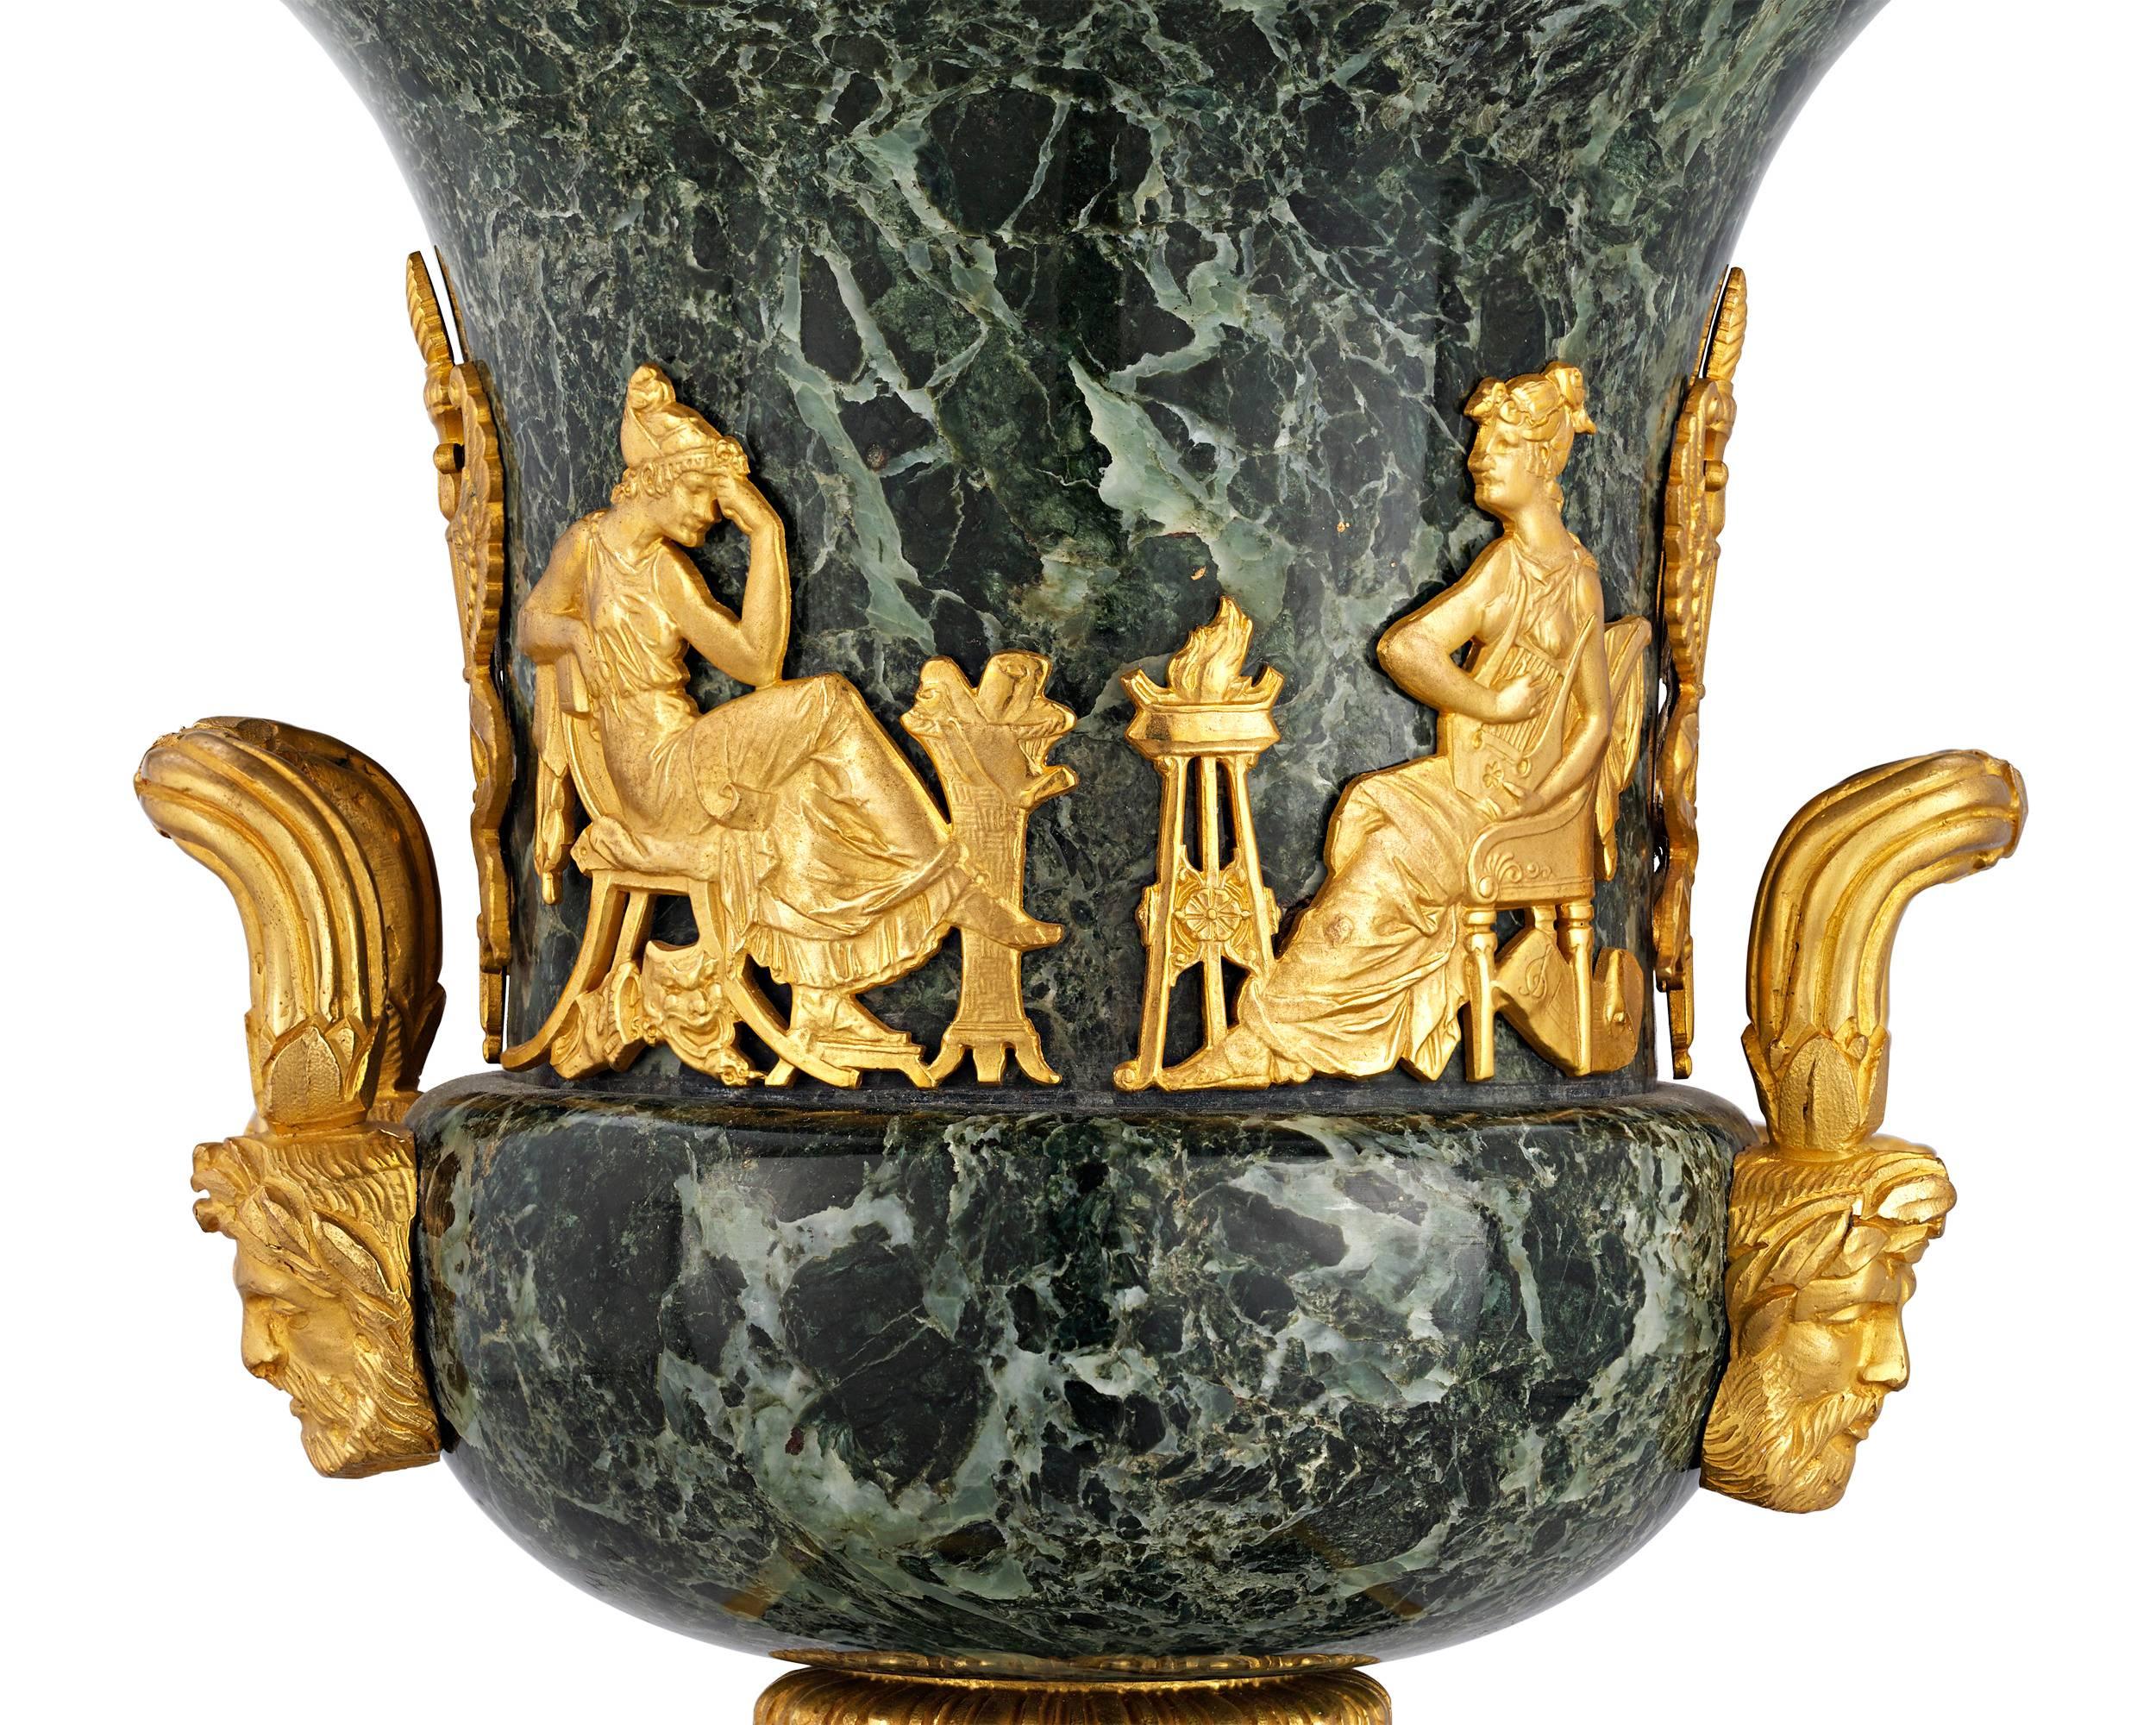 The classical grandeur of the Empire style is on display in this pair of verde antico marble and doré bronze urns. Crafted in an iconic krater form, the urns display a bold Greco-Roman influenced the design, including a stunning frieze motif